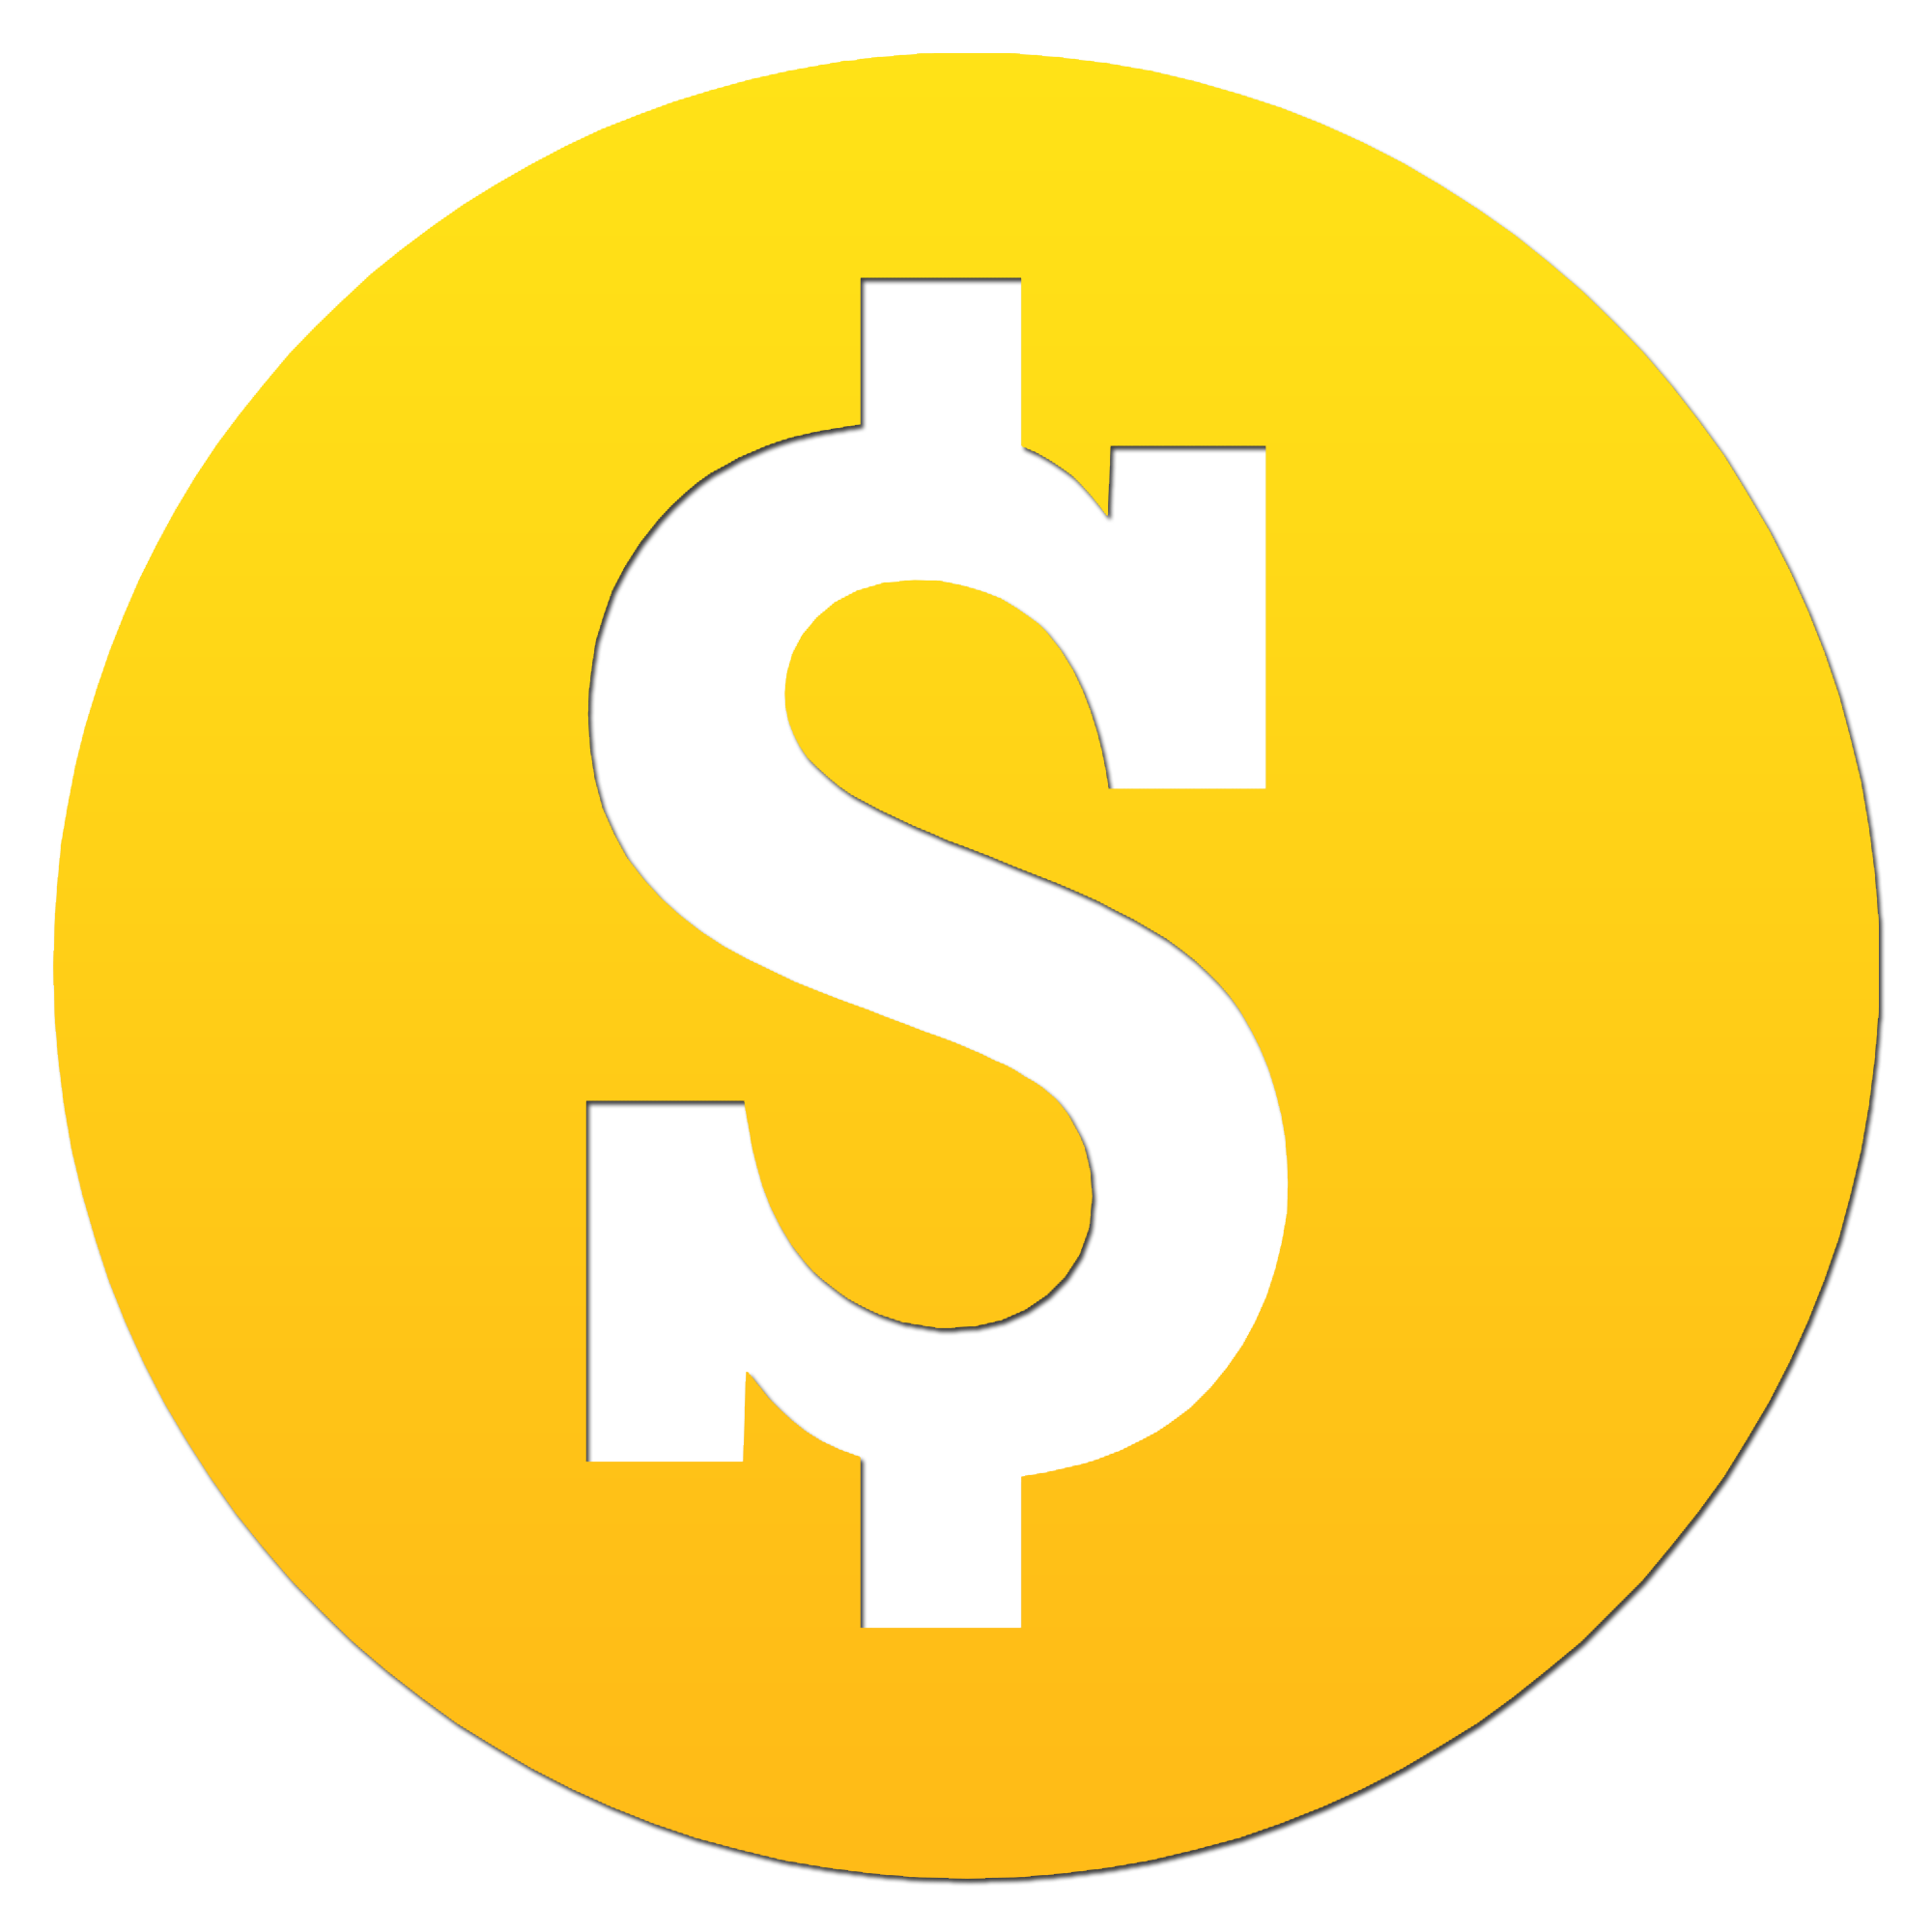 Dollar Sign Icon Png #3550 - Free Icons and PNG Backgrounds